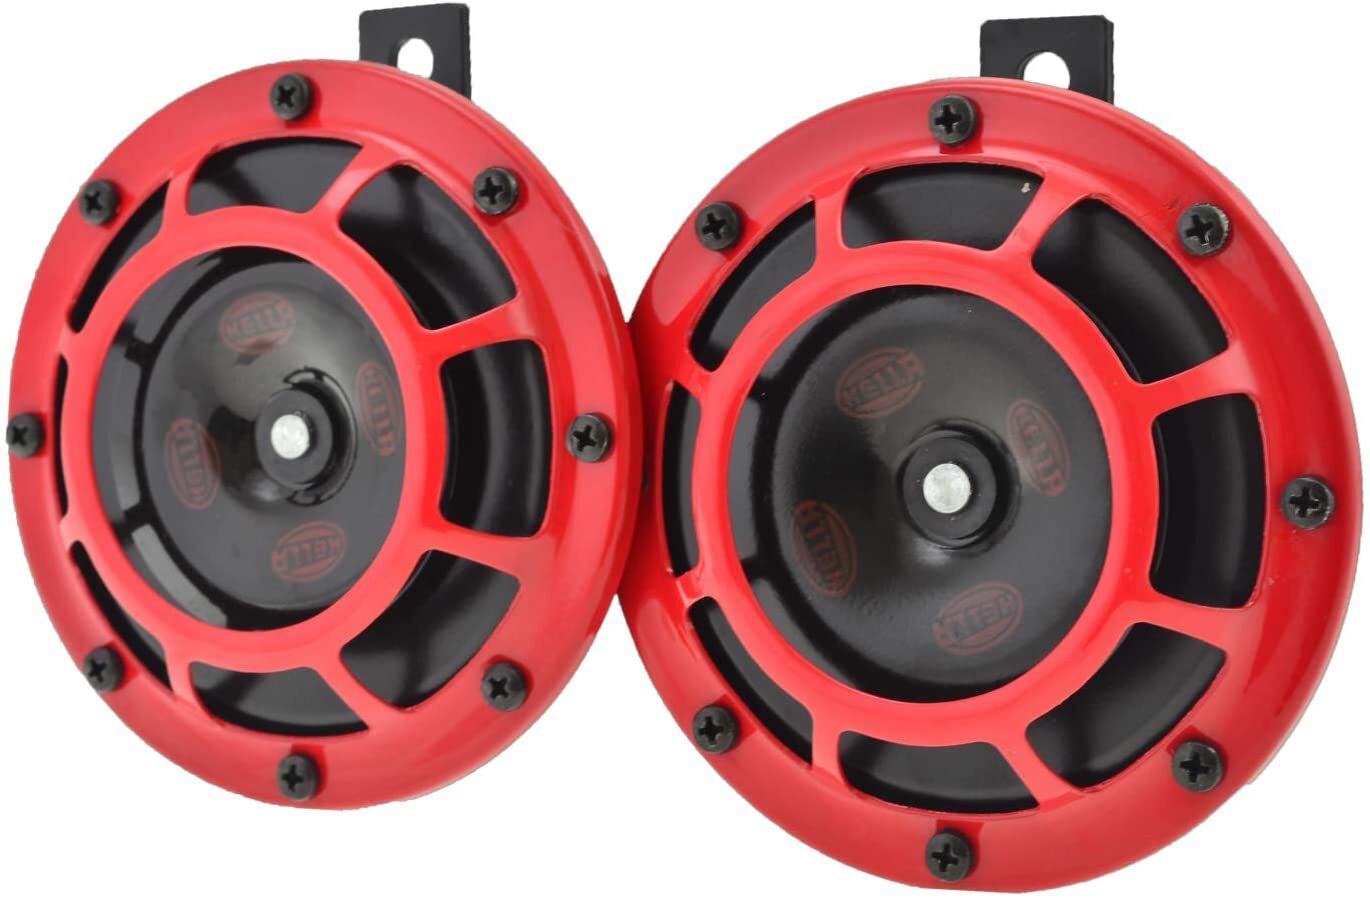 Hella 003399801RD Twin Supertone Horn Kit - Red